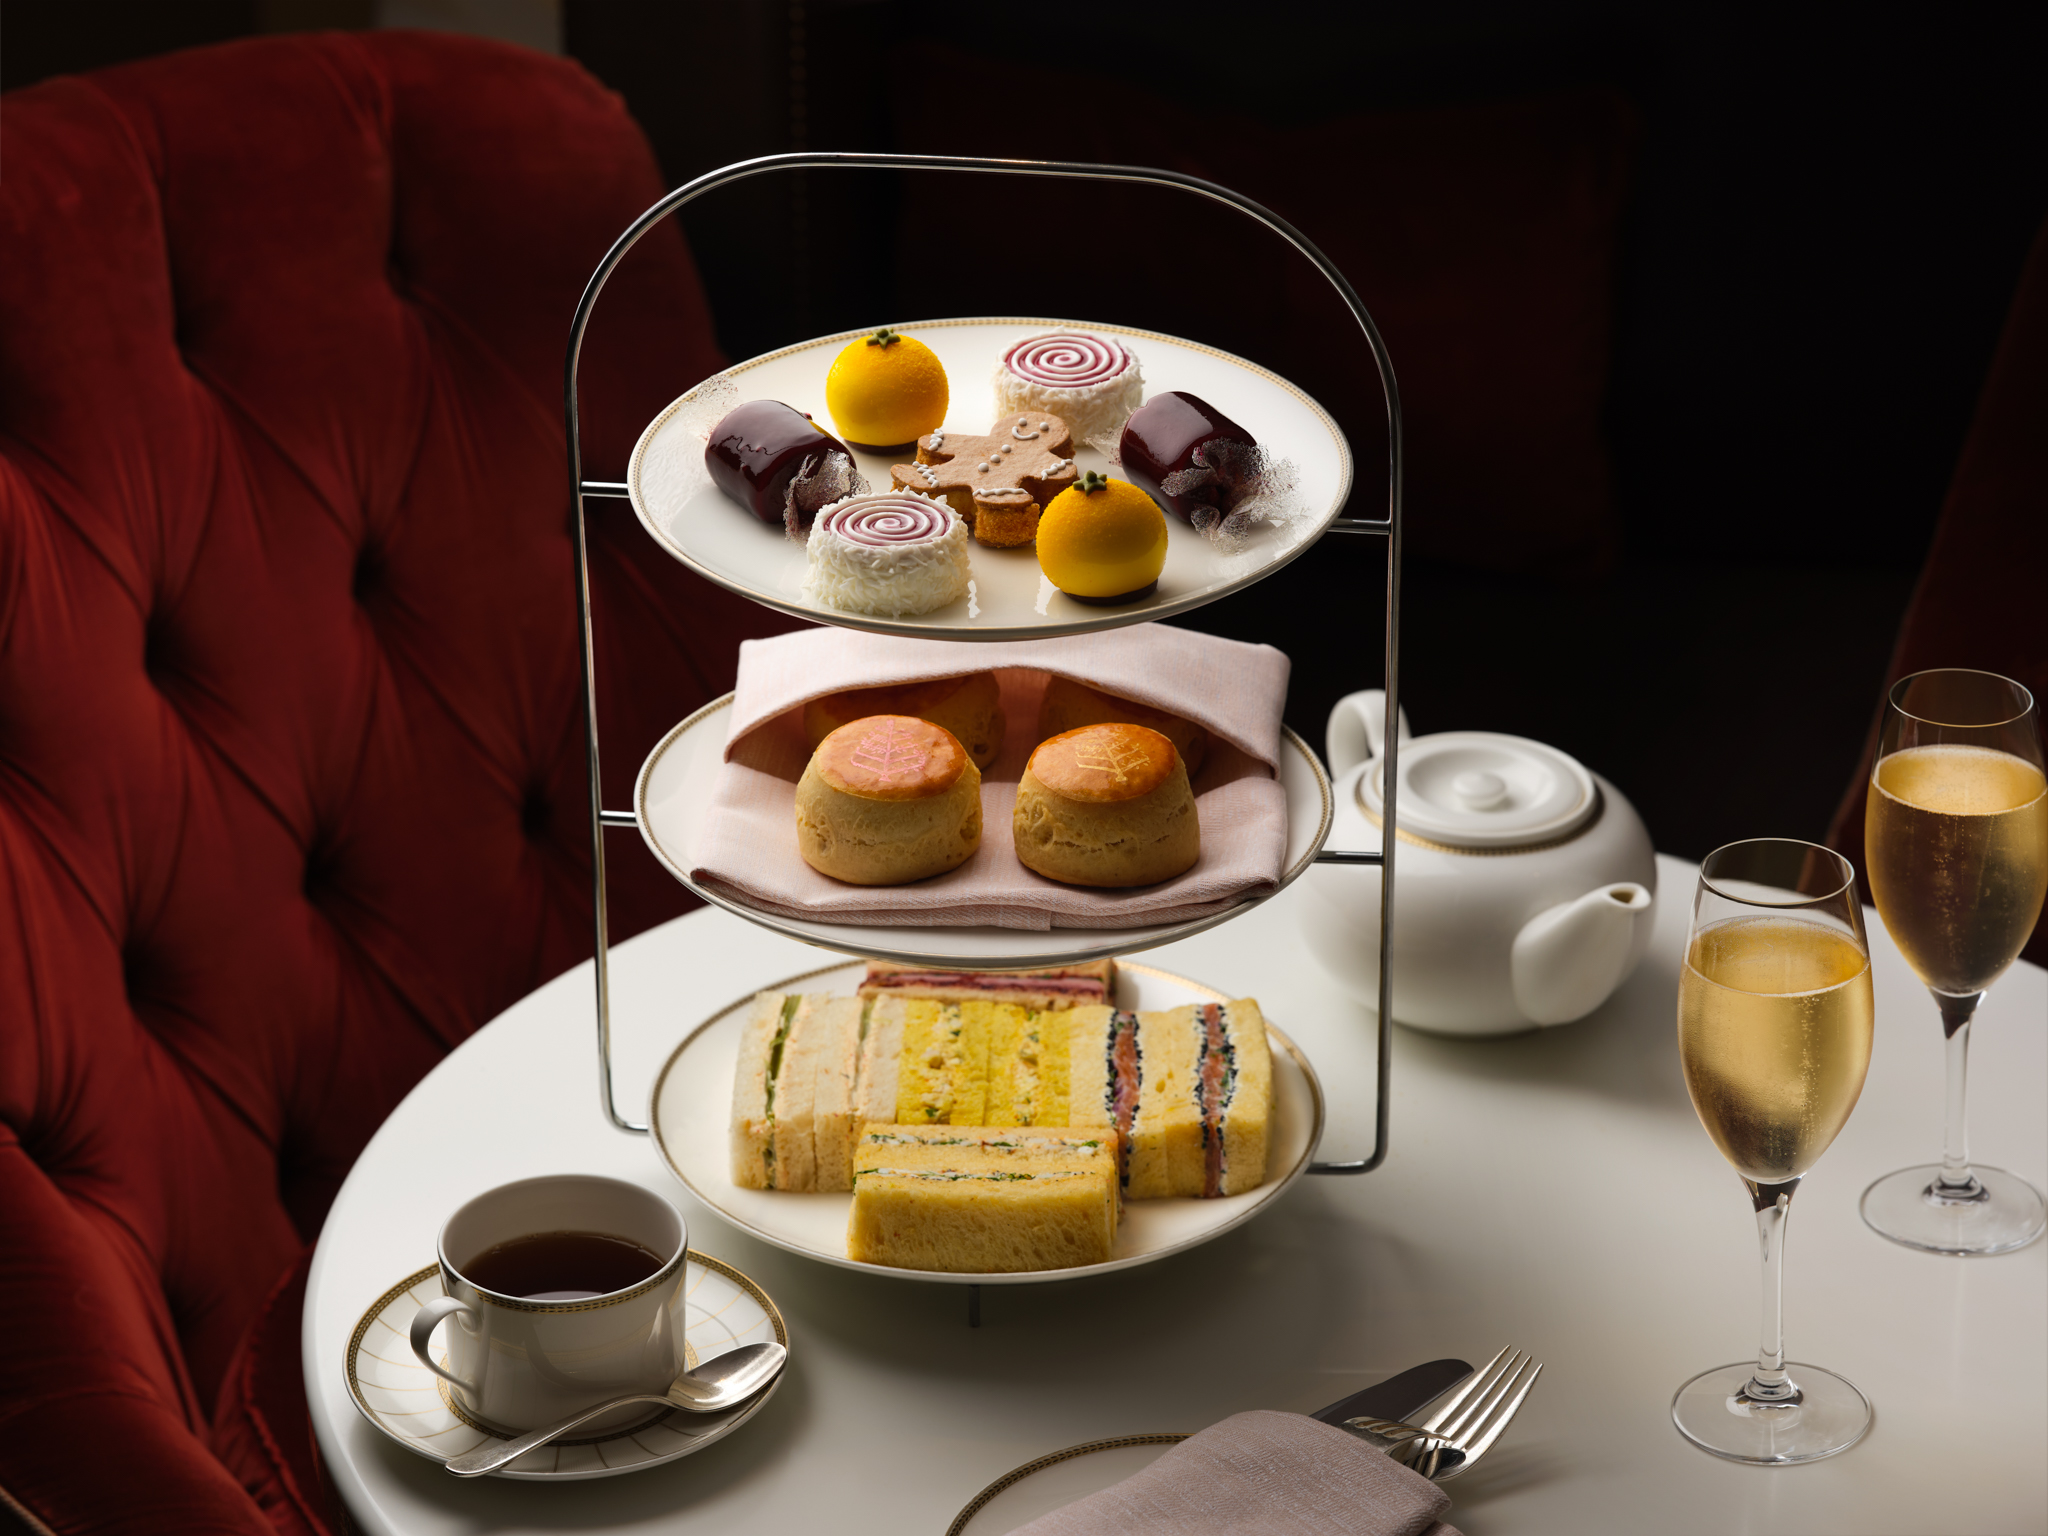 Festive afternoon tea at Four Seasons Ten Trinity Square